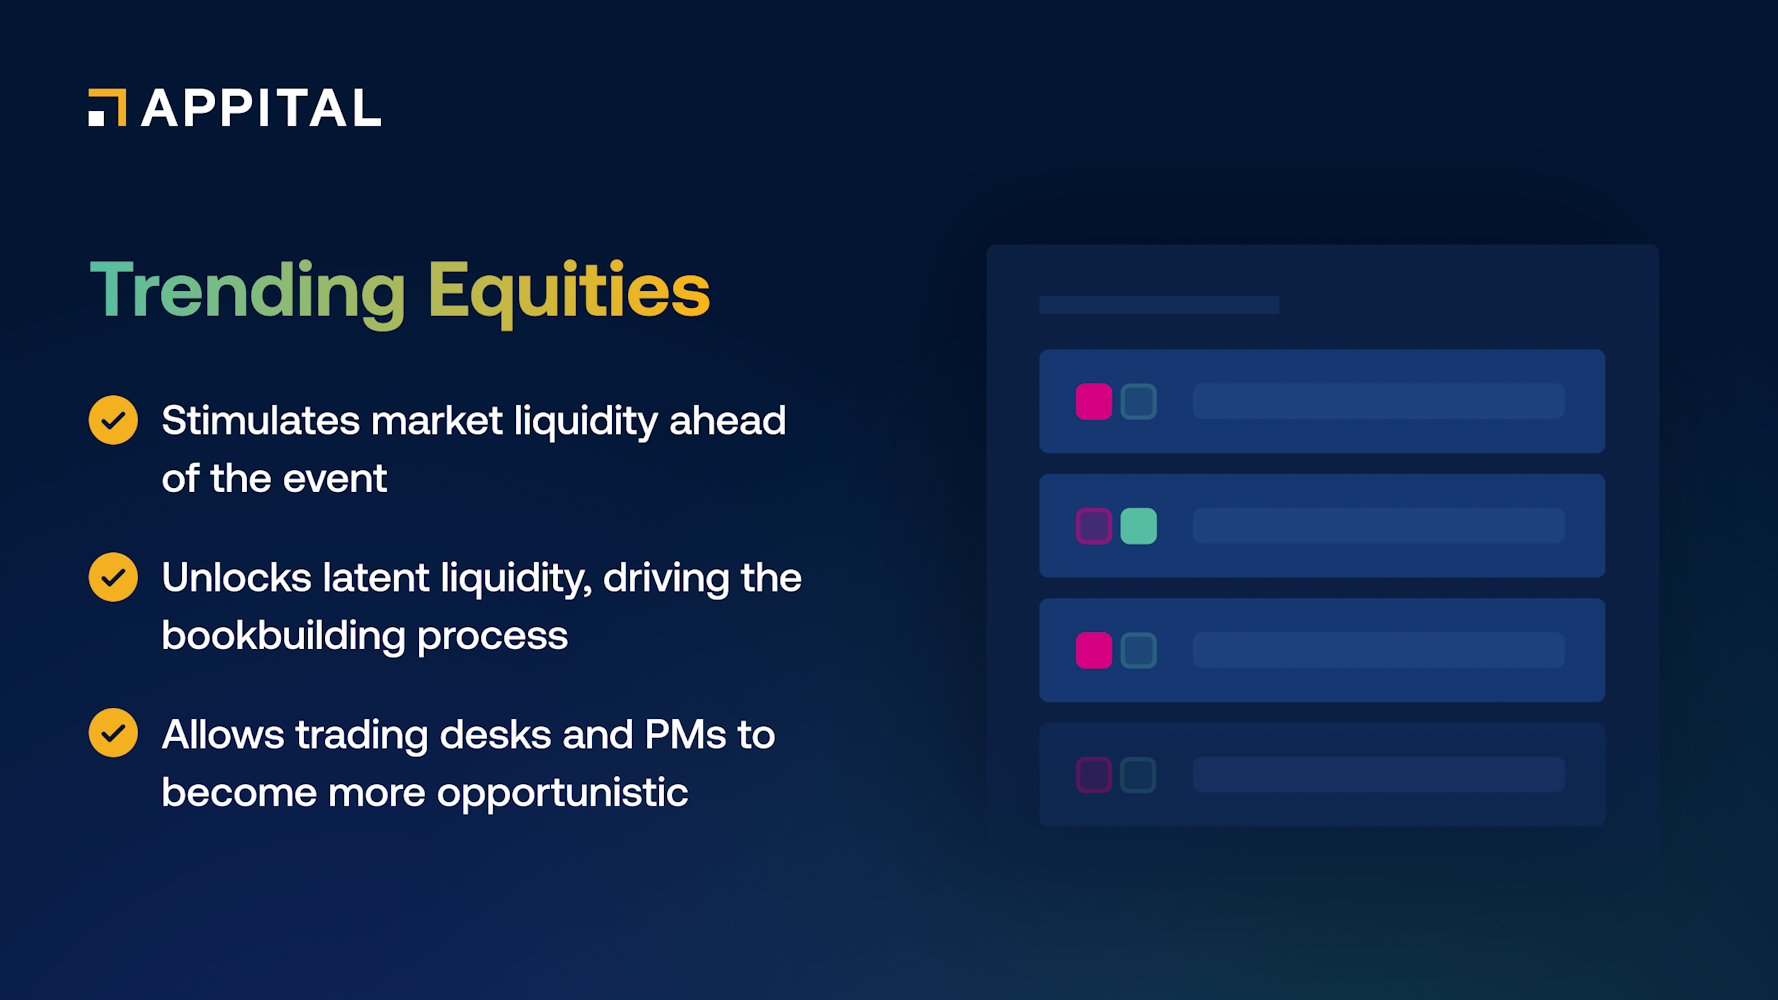 Appital launches ‘Trending Equities’ to drive opportunistic buyside liquidity